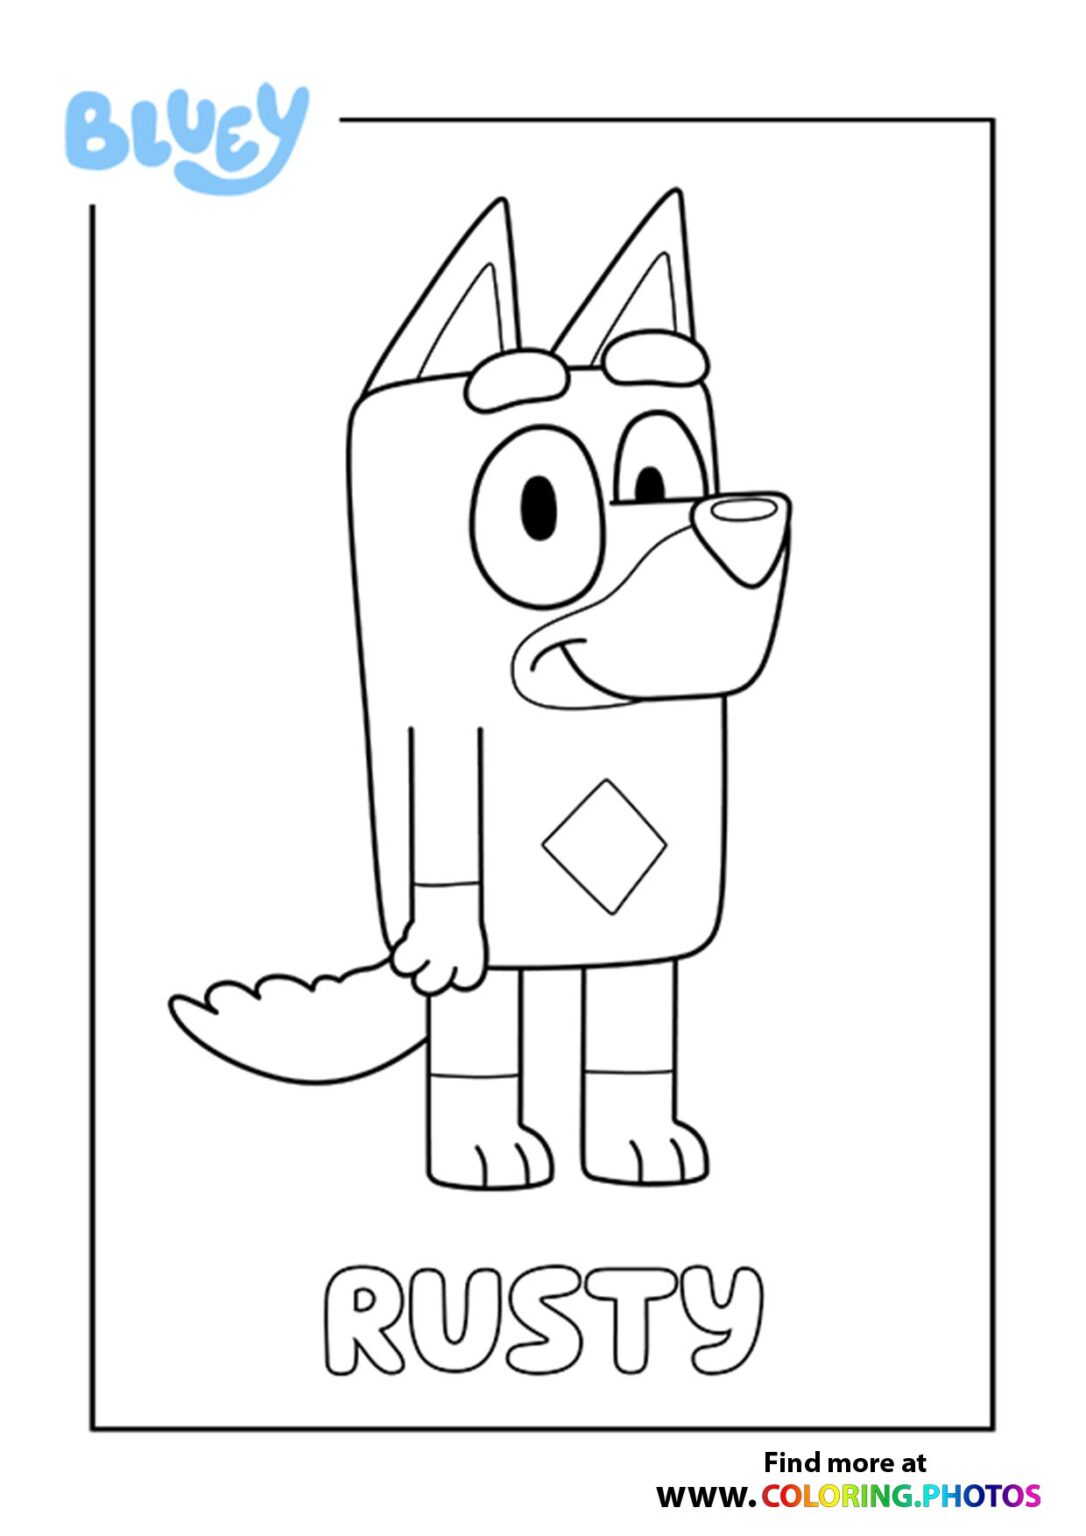 Bluey Coloring Pages For Kids Free And Easy Print Or Download